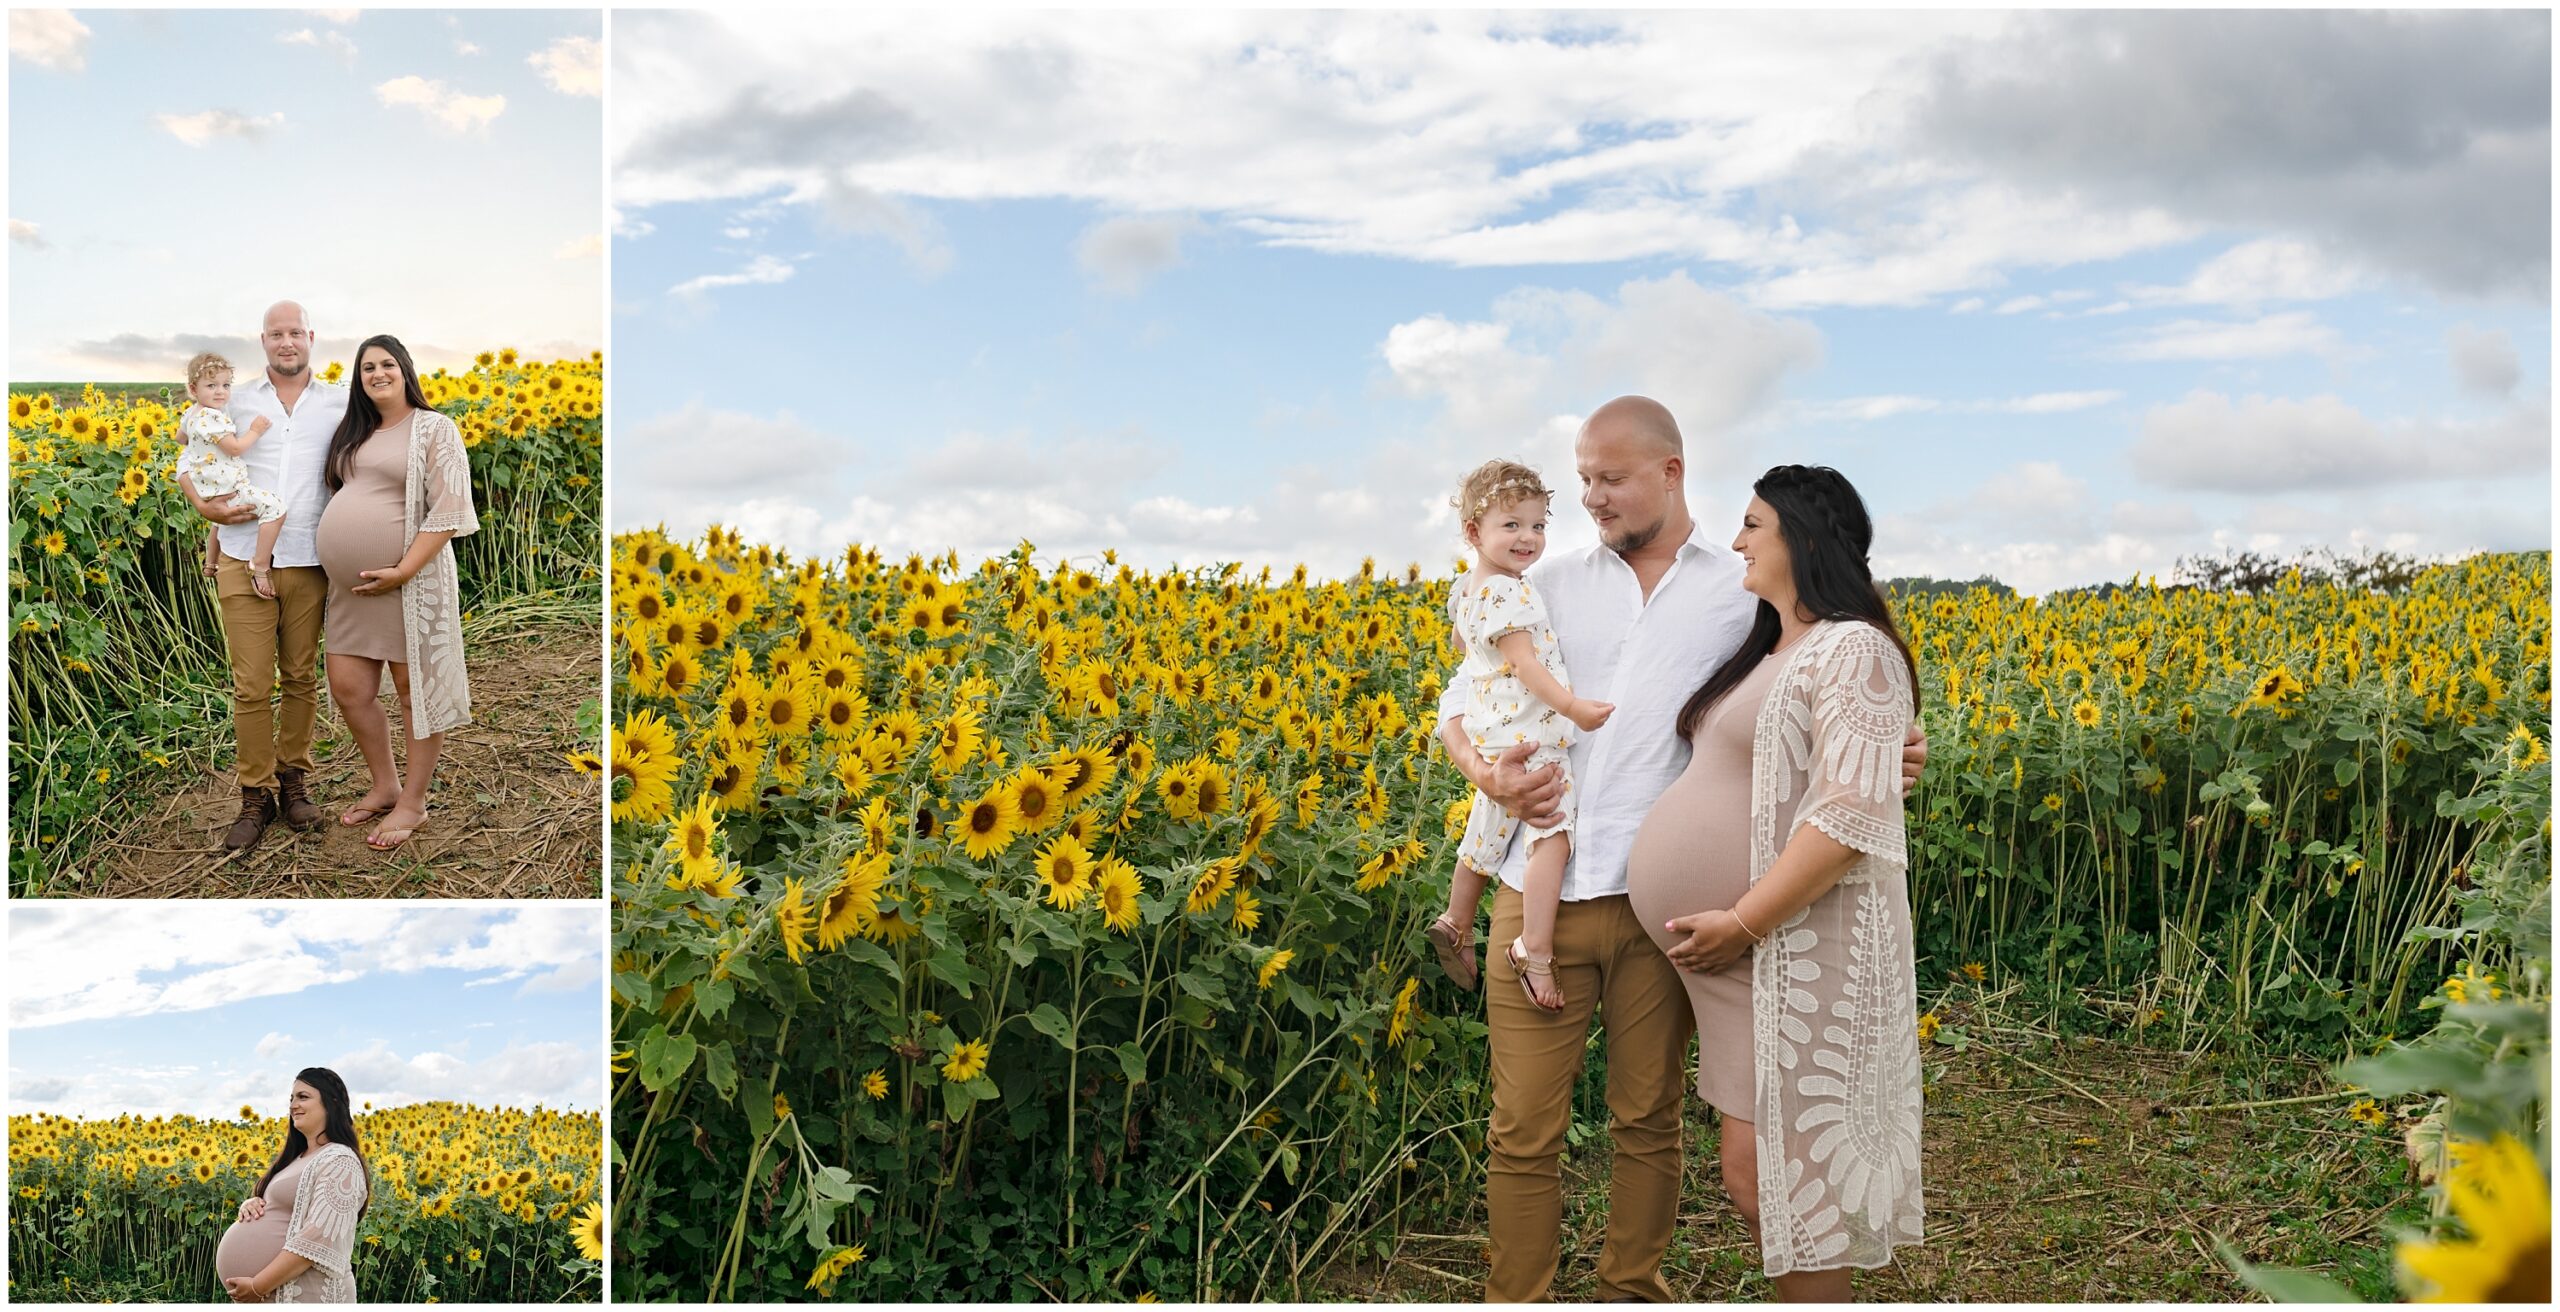 Renshaw Family Farms Sunflower Session Freeport PA Pittsburgh, 51 Locations for Photography in Pittsburgh